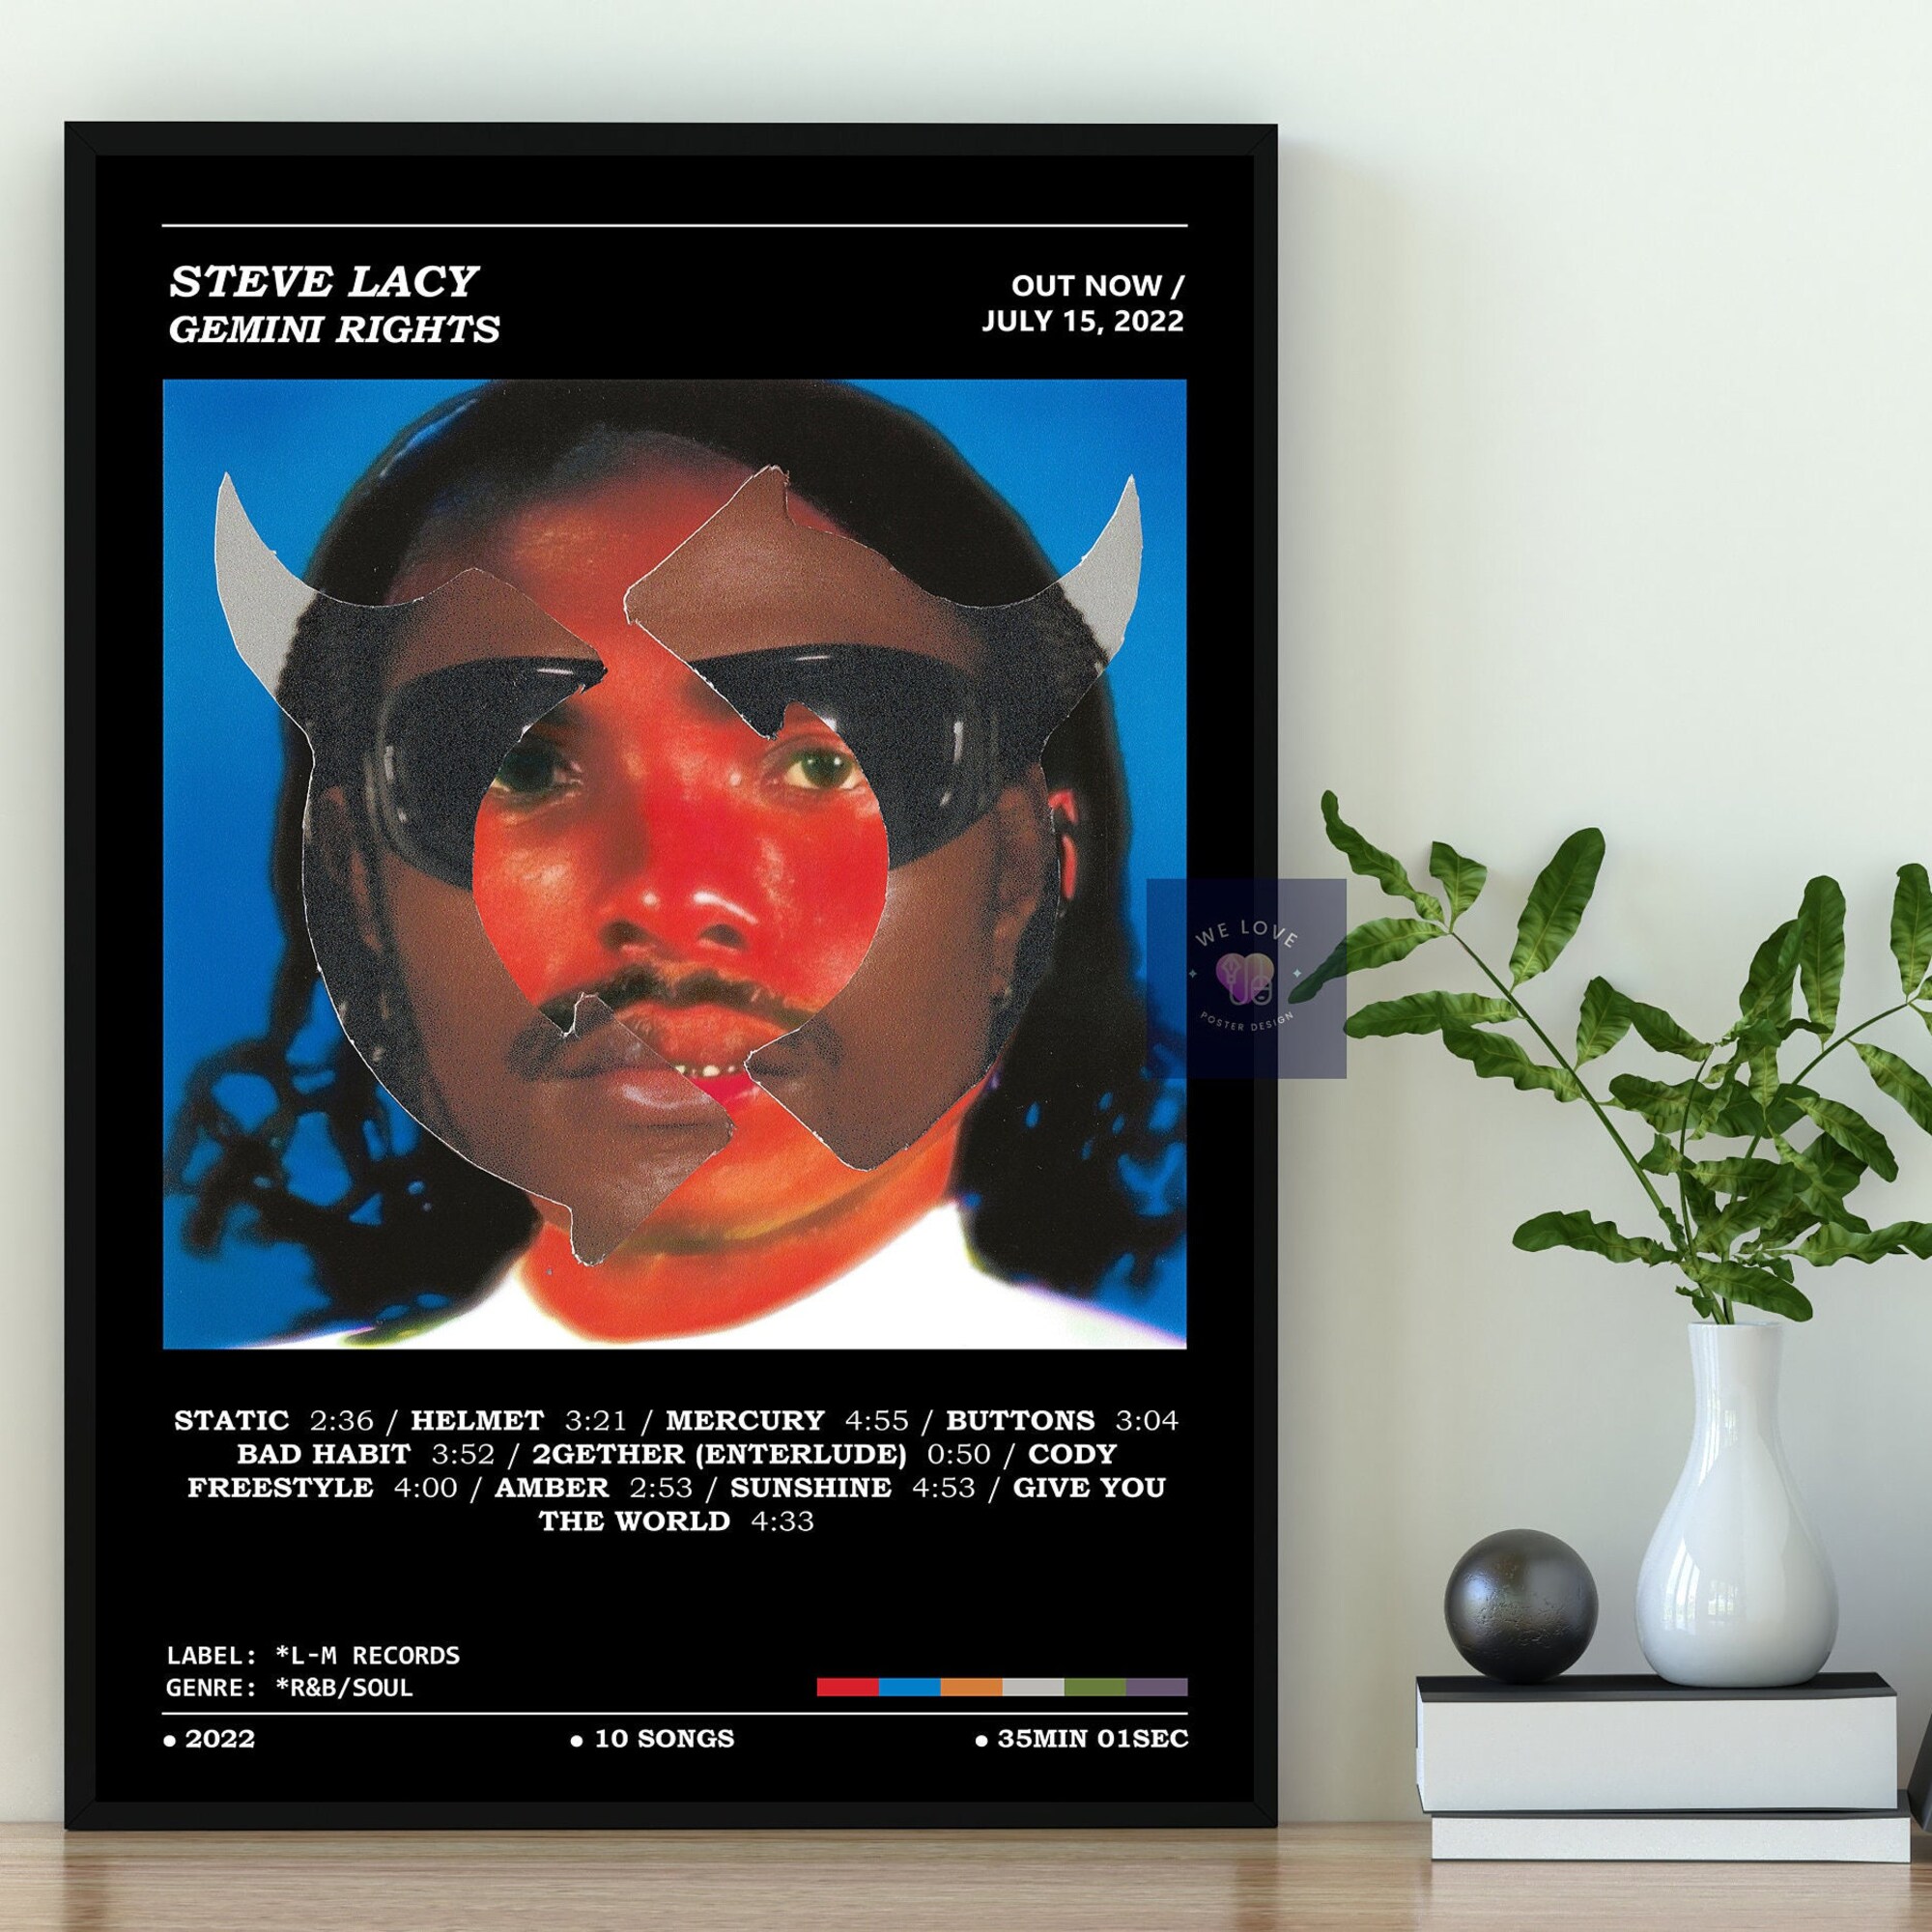 Steve Lacy - Gemini Rights Album Poster / Steve Lacy Poster